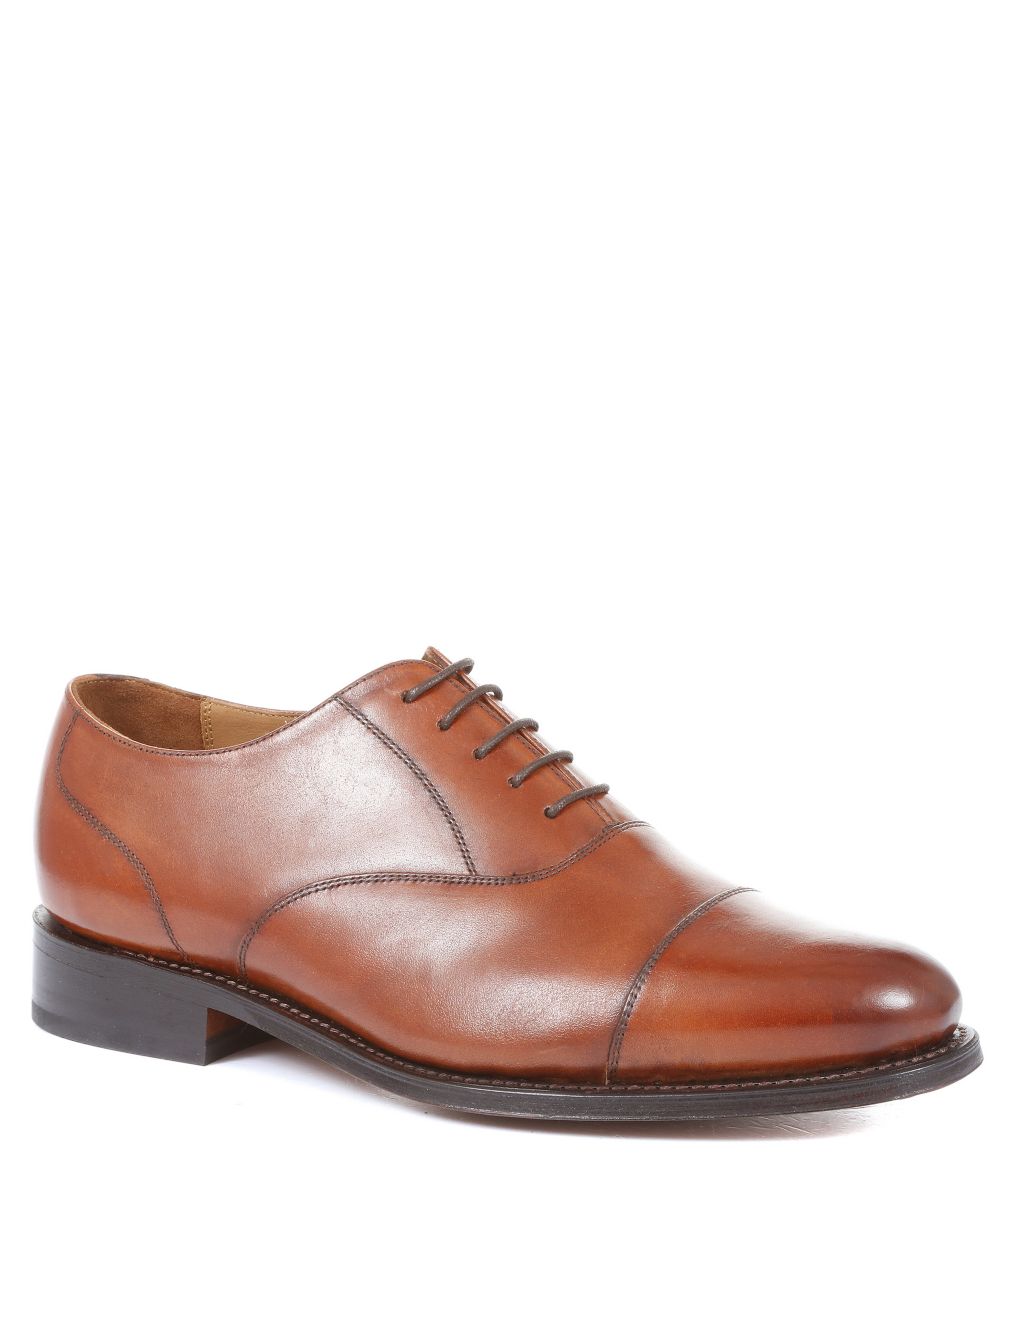 Leather Goodyear Welted Oxford Shoes | Jones Bootmaker | M&S